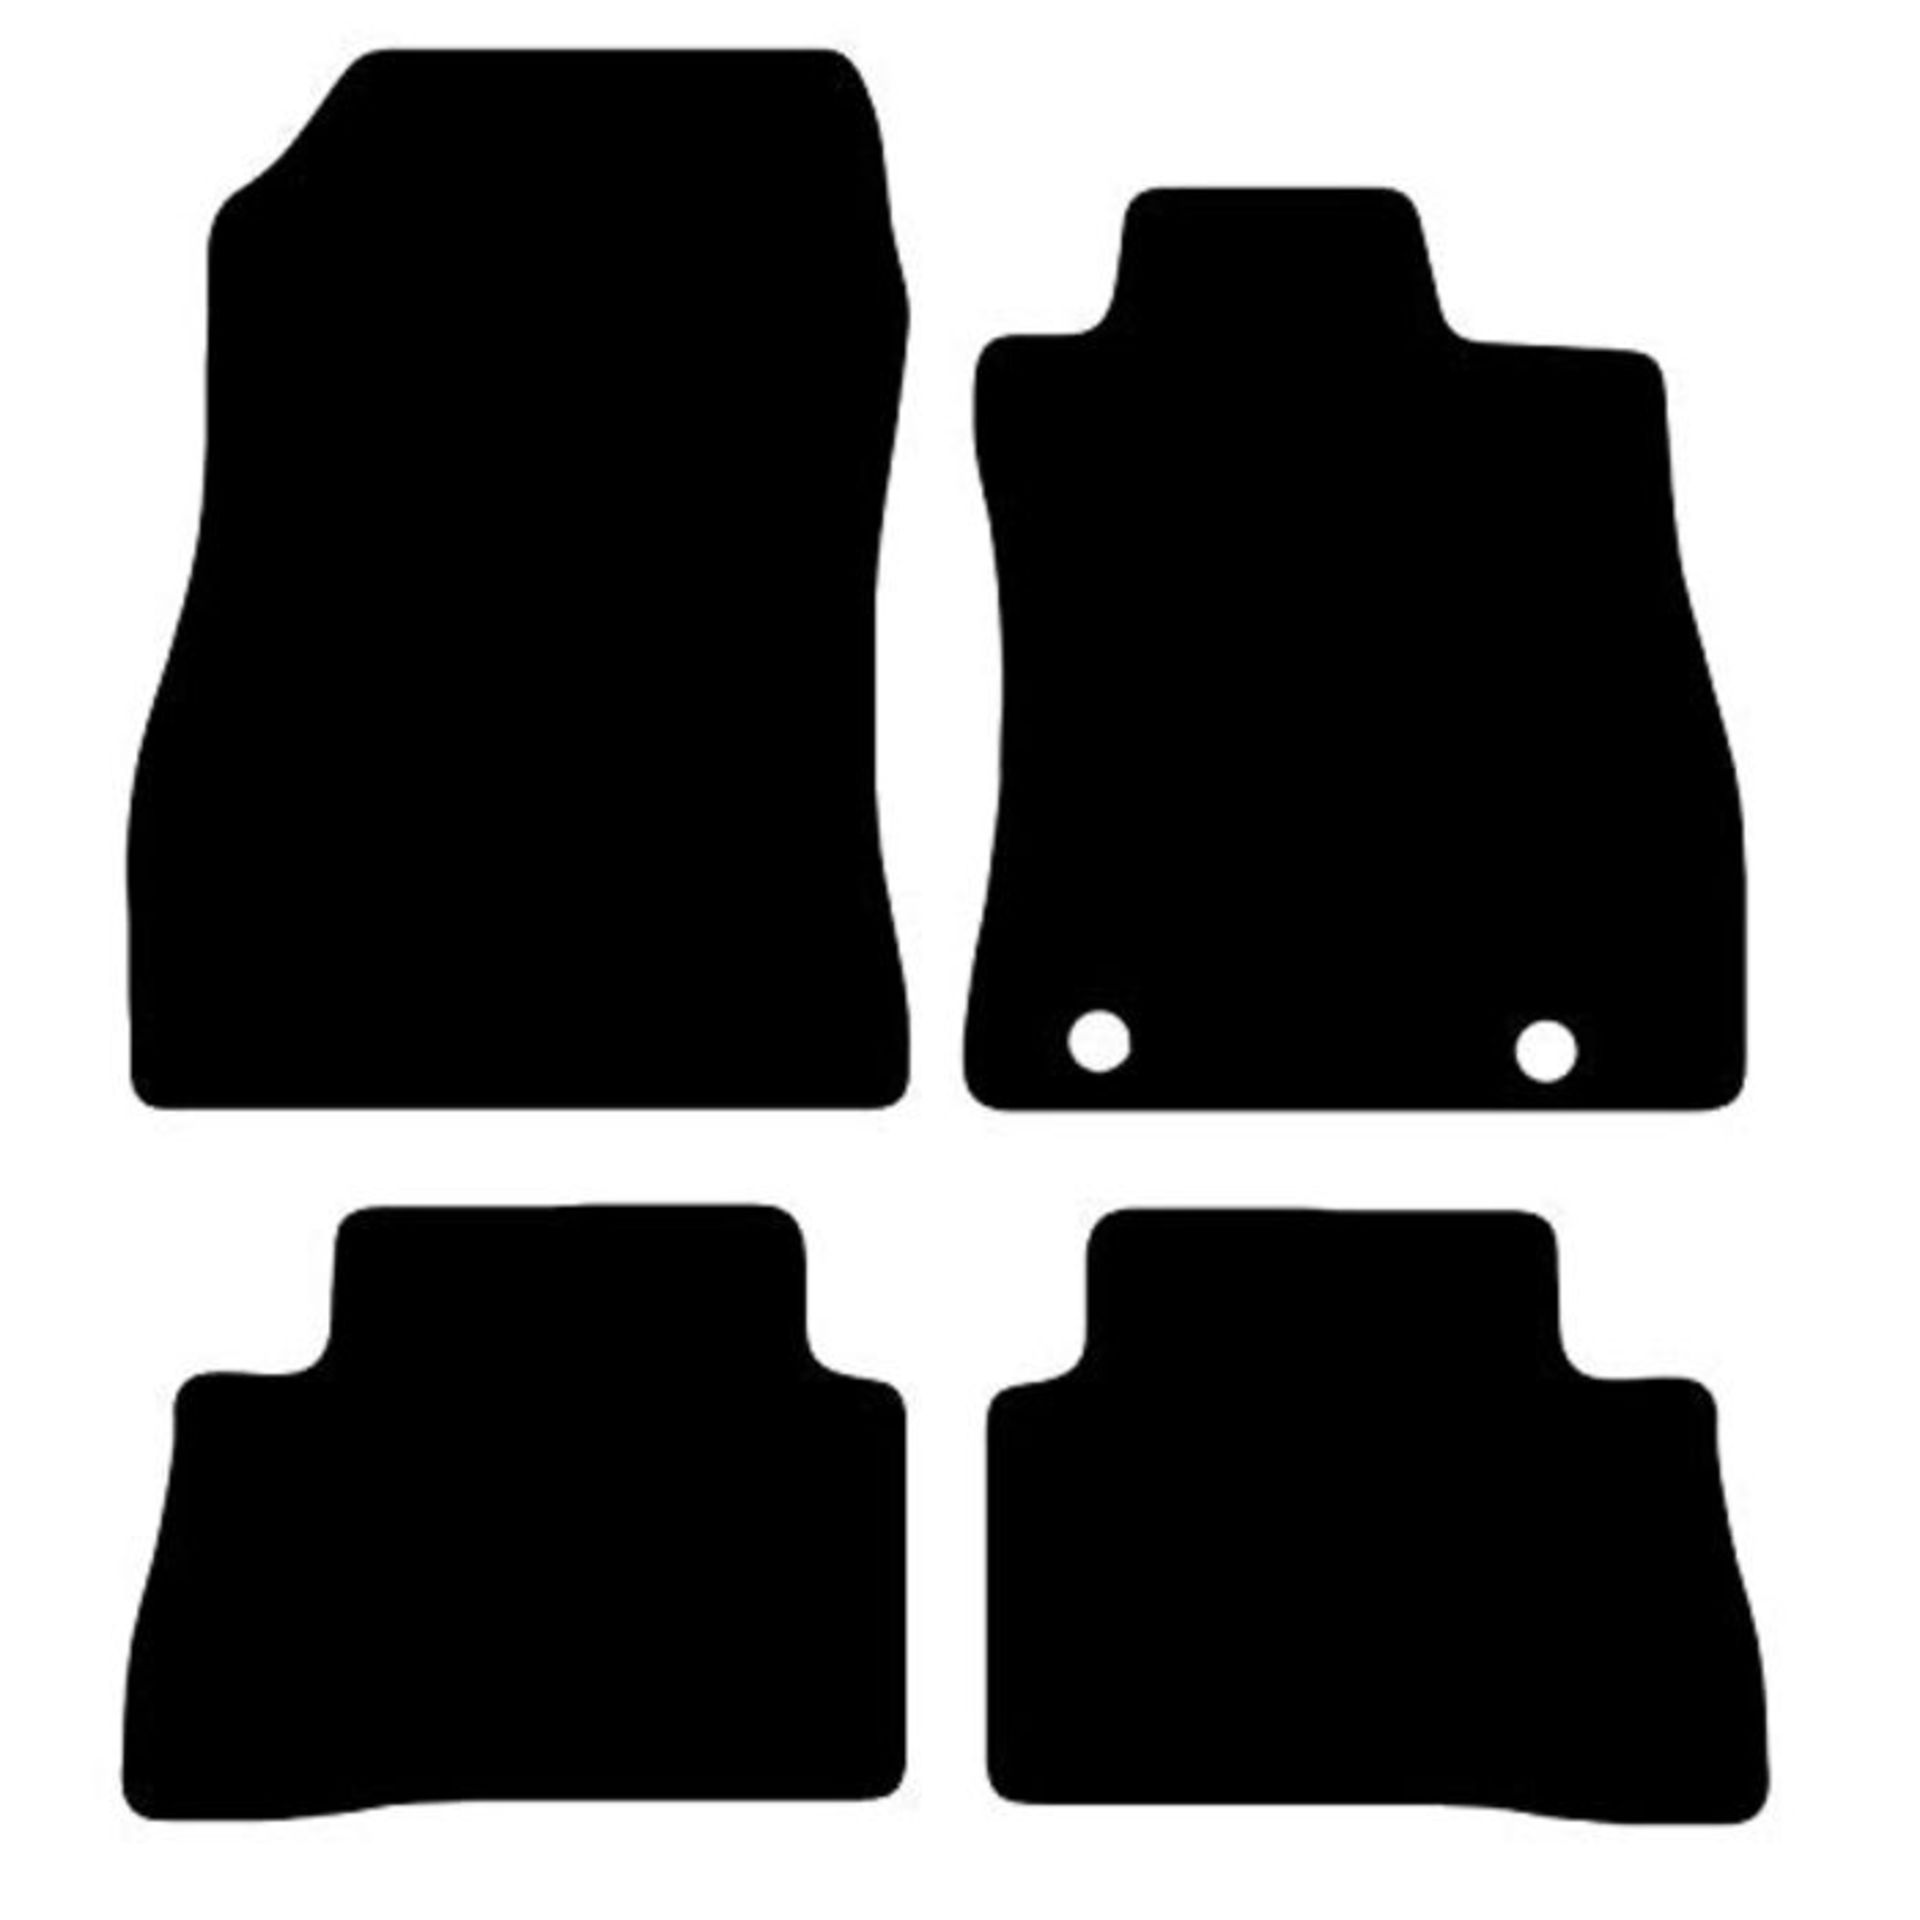 Carsio Tailored Black Carpet Car Mats for Juke 2010 onwards - 4 Piece Set With 2 Clips